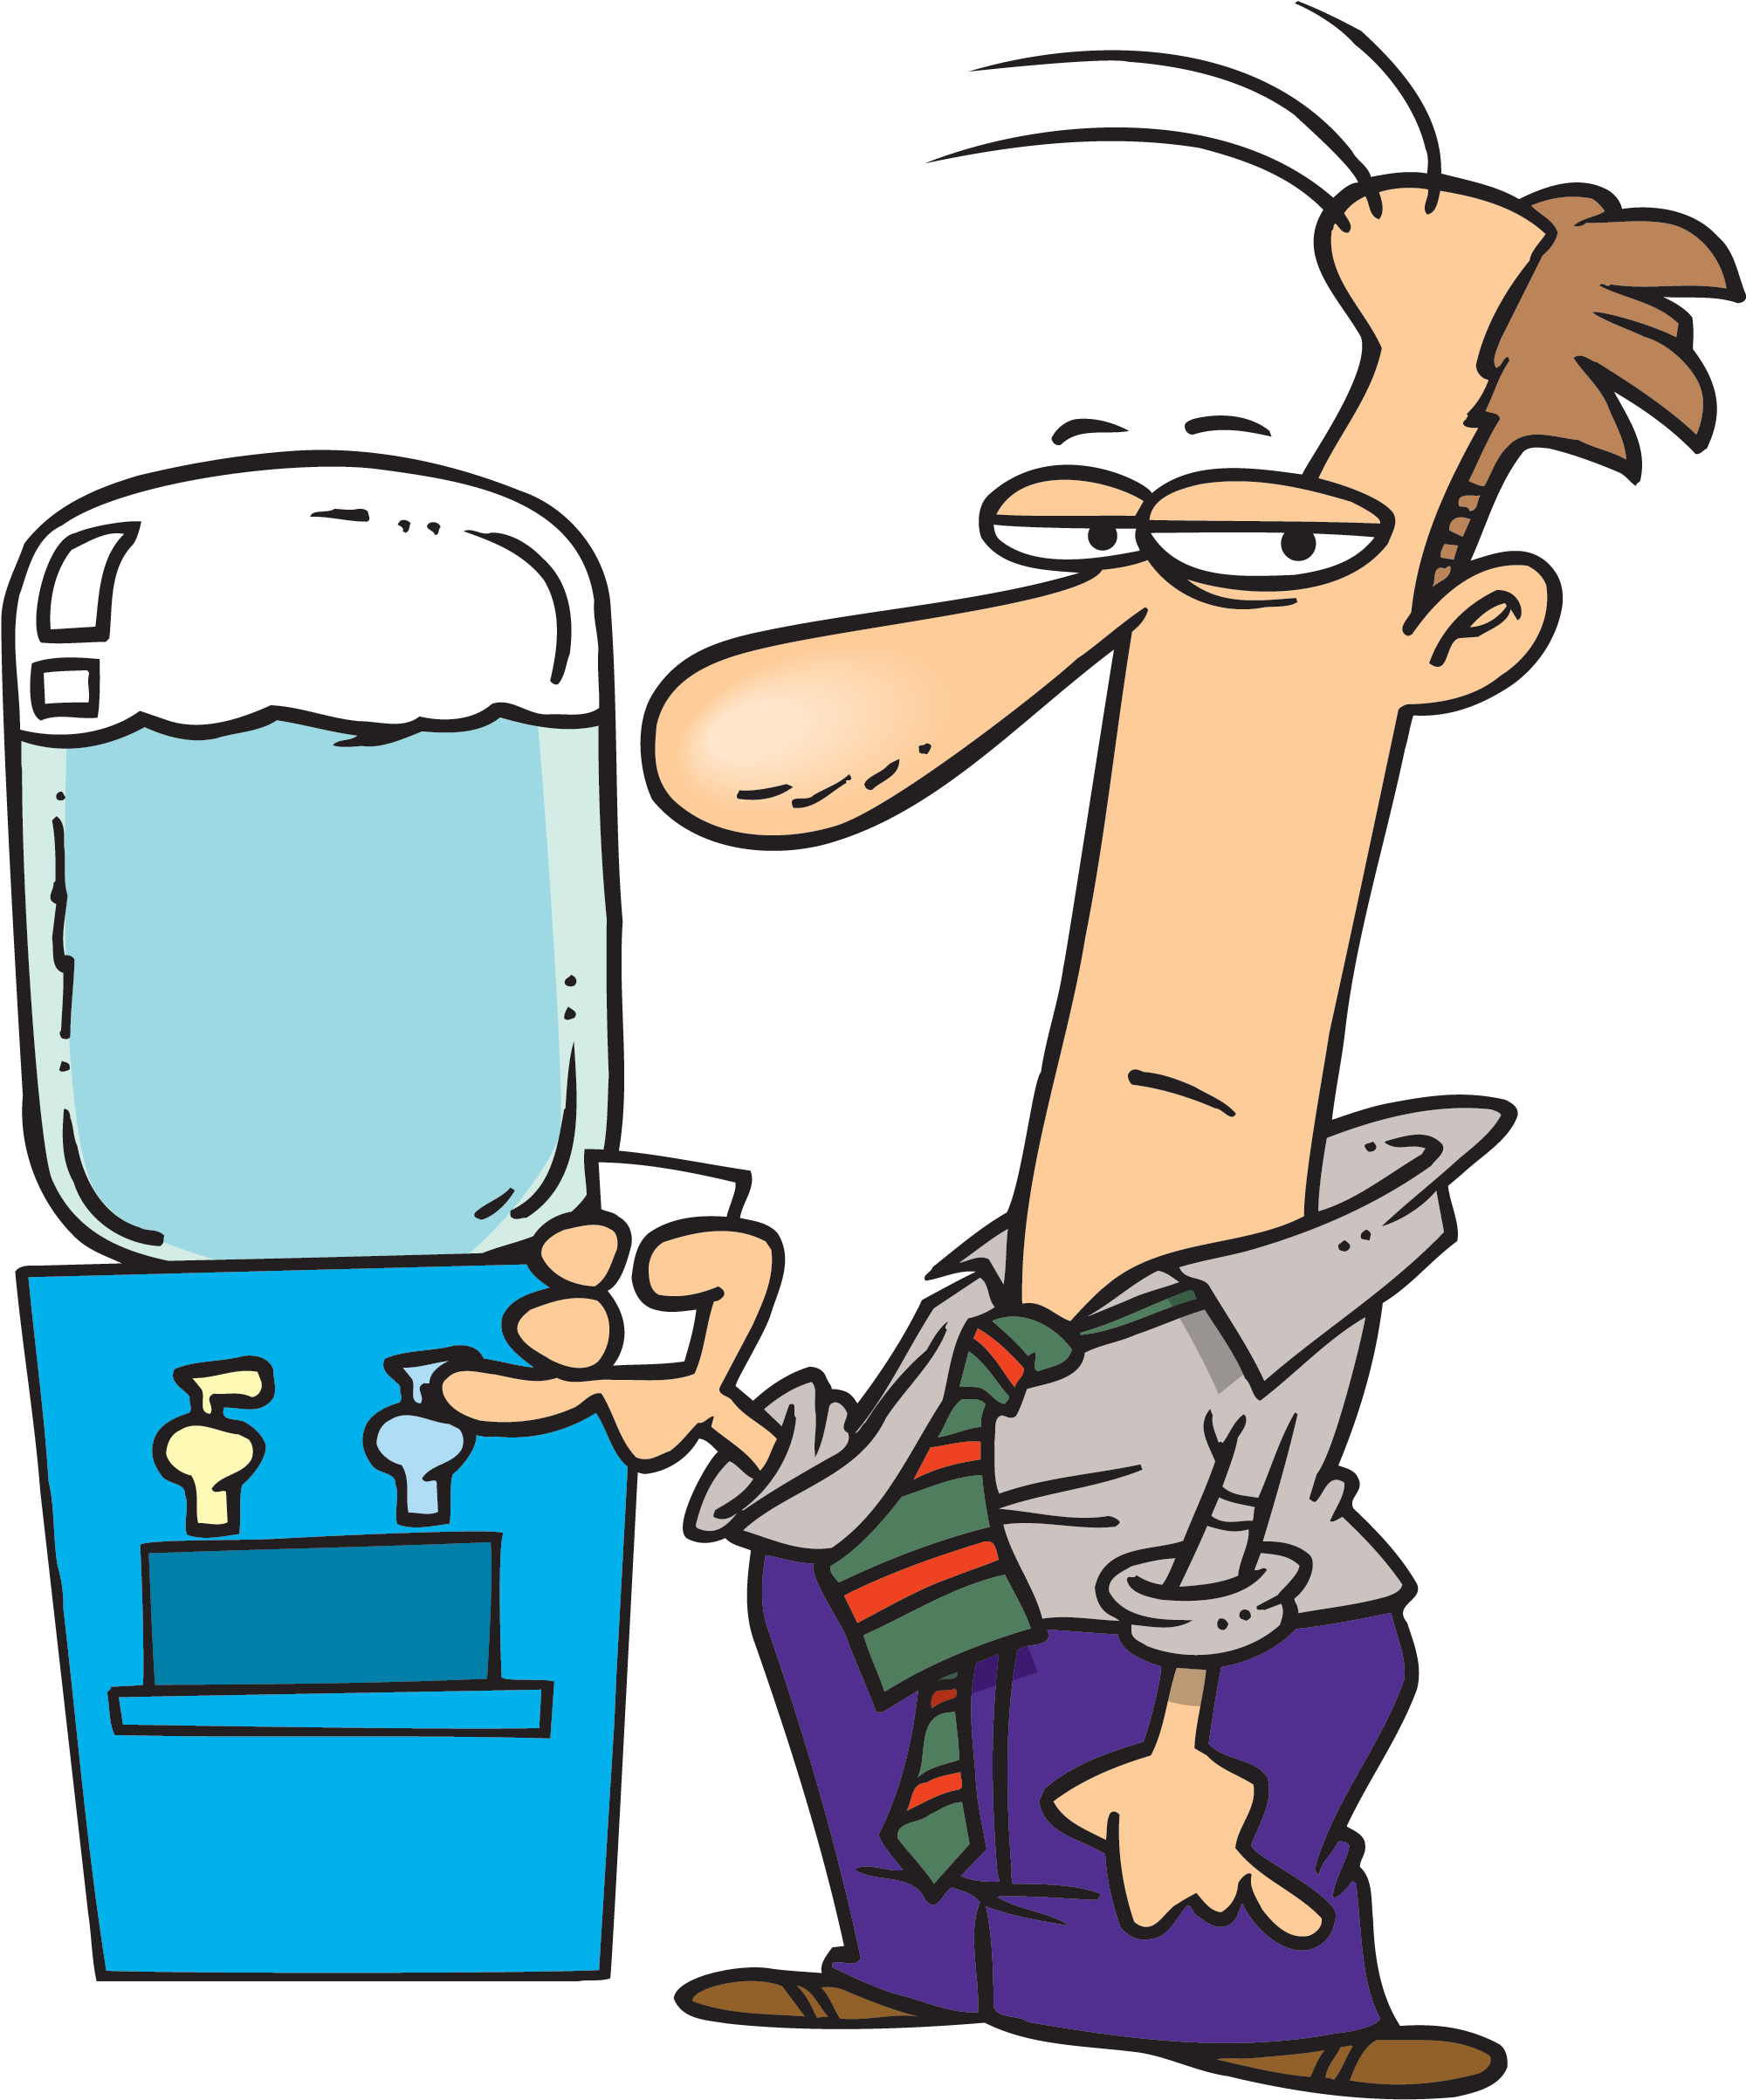 Clip Arts Related To : office water cooler clipart. view all cooler-clipart...